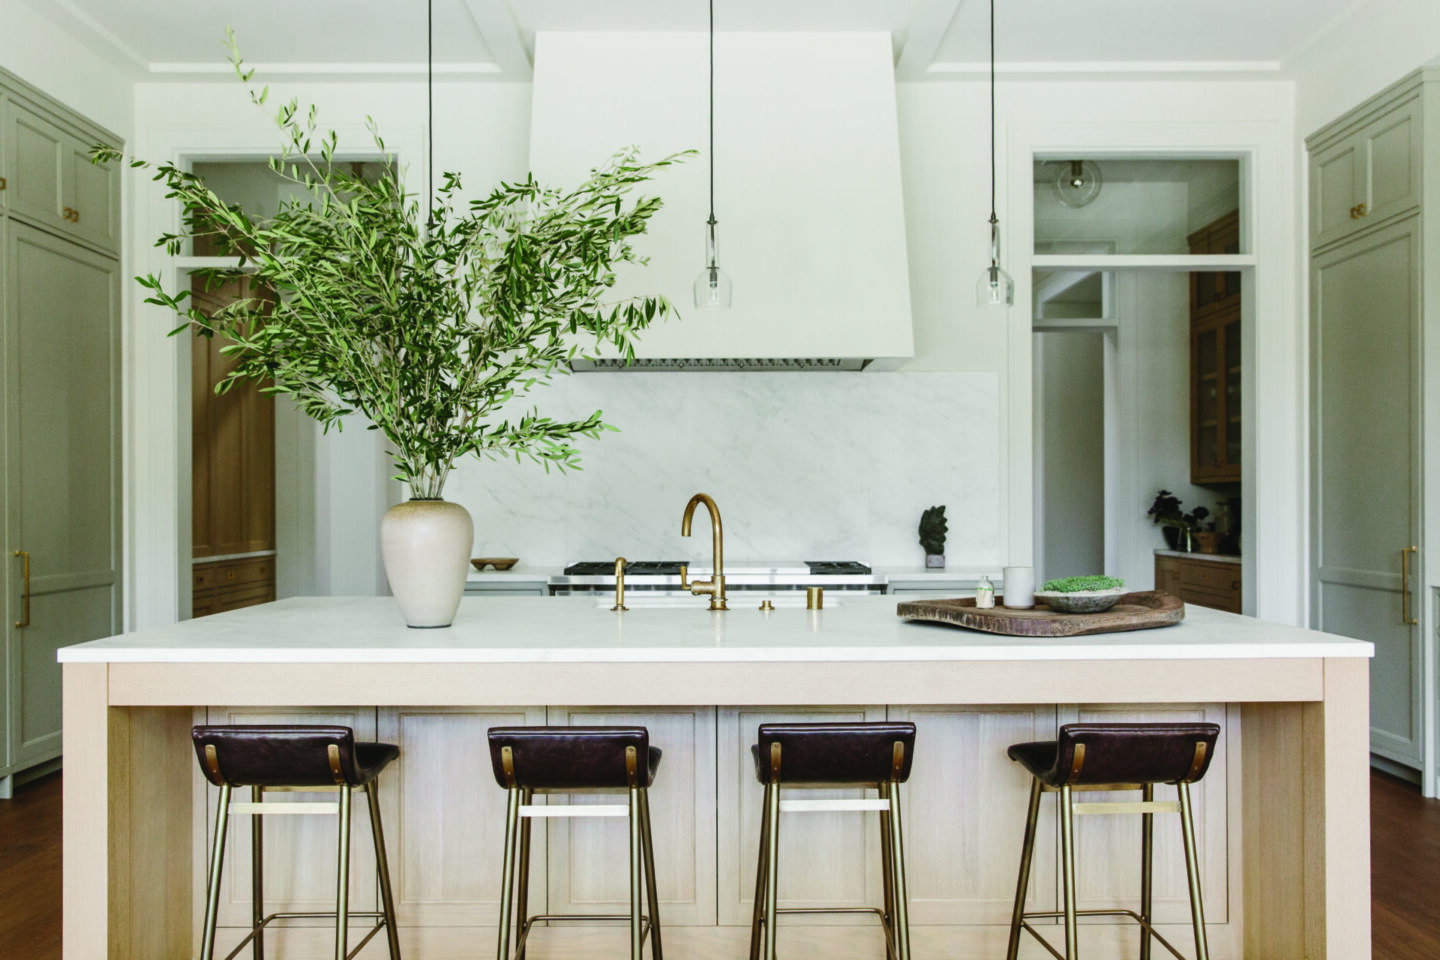 Sheila Bouttier designed modern natural kitchen in Pacific Natural at Home (by Jenni Kayne). #californiakitchens #pacificnatural #minimalkitchen